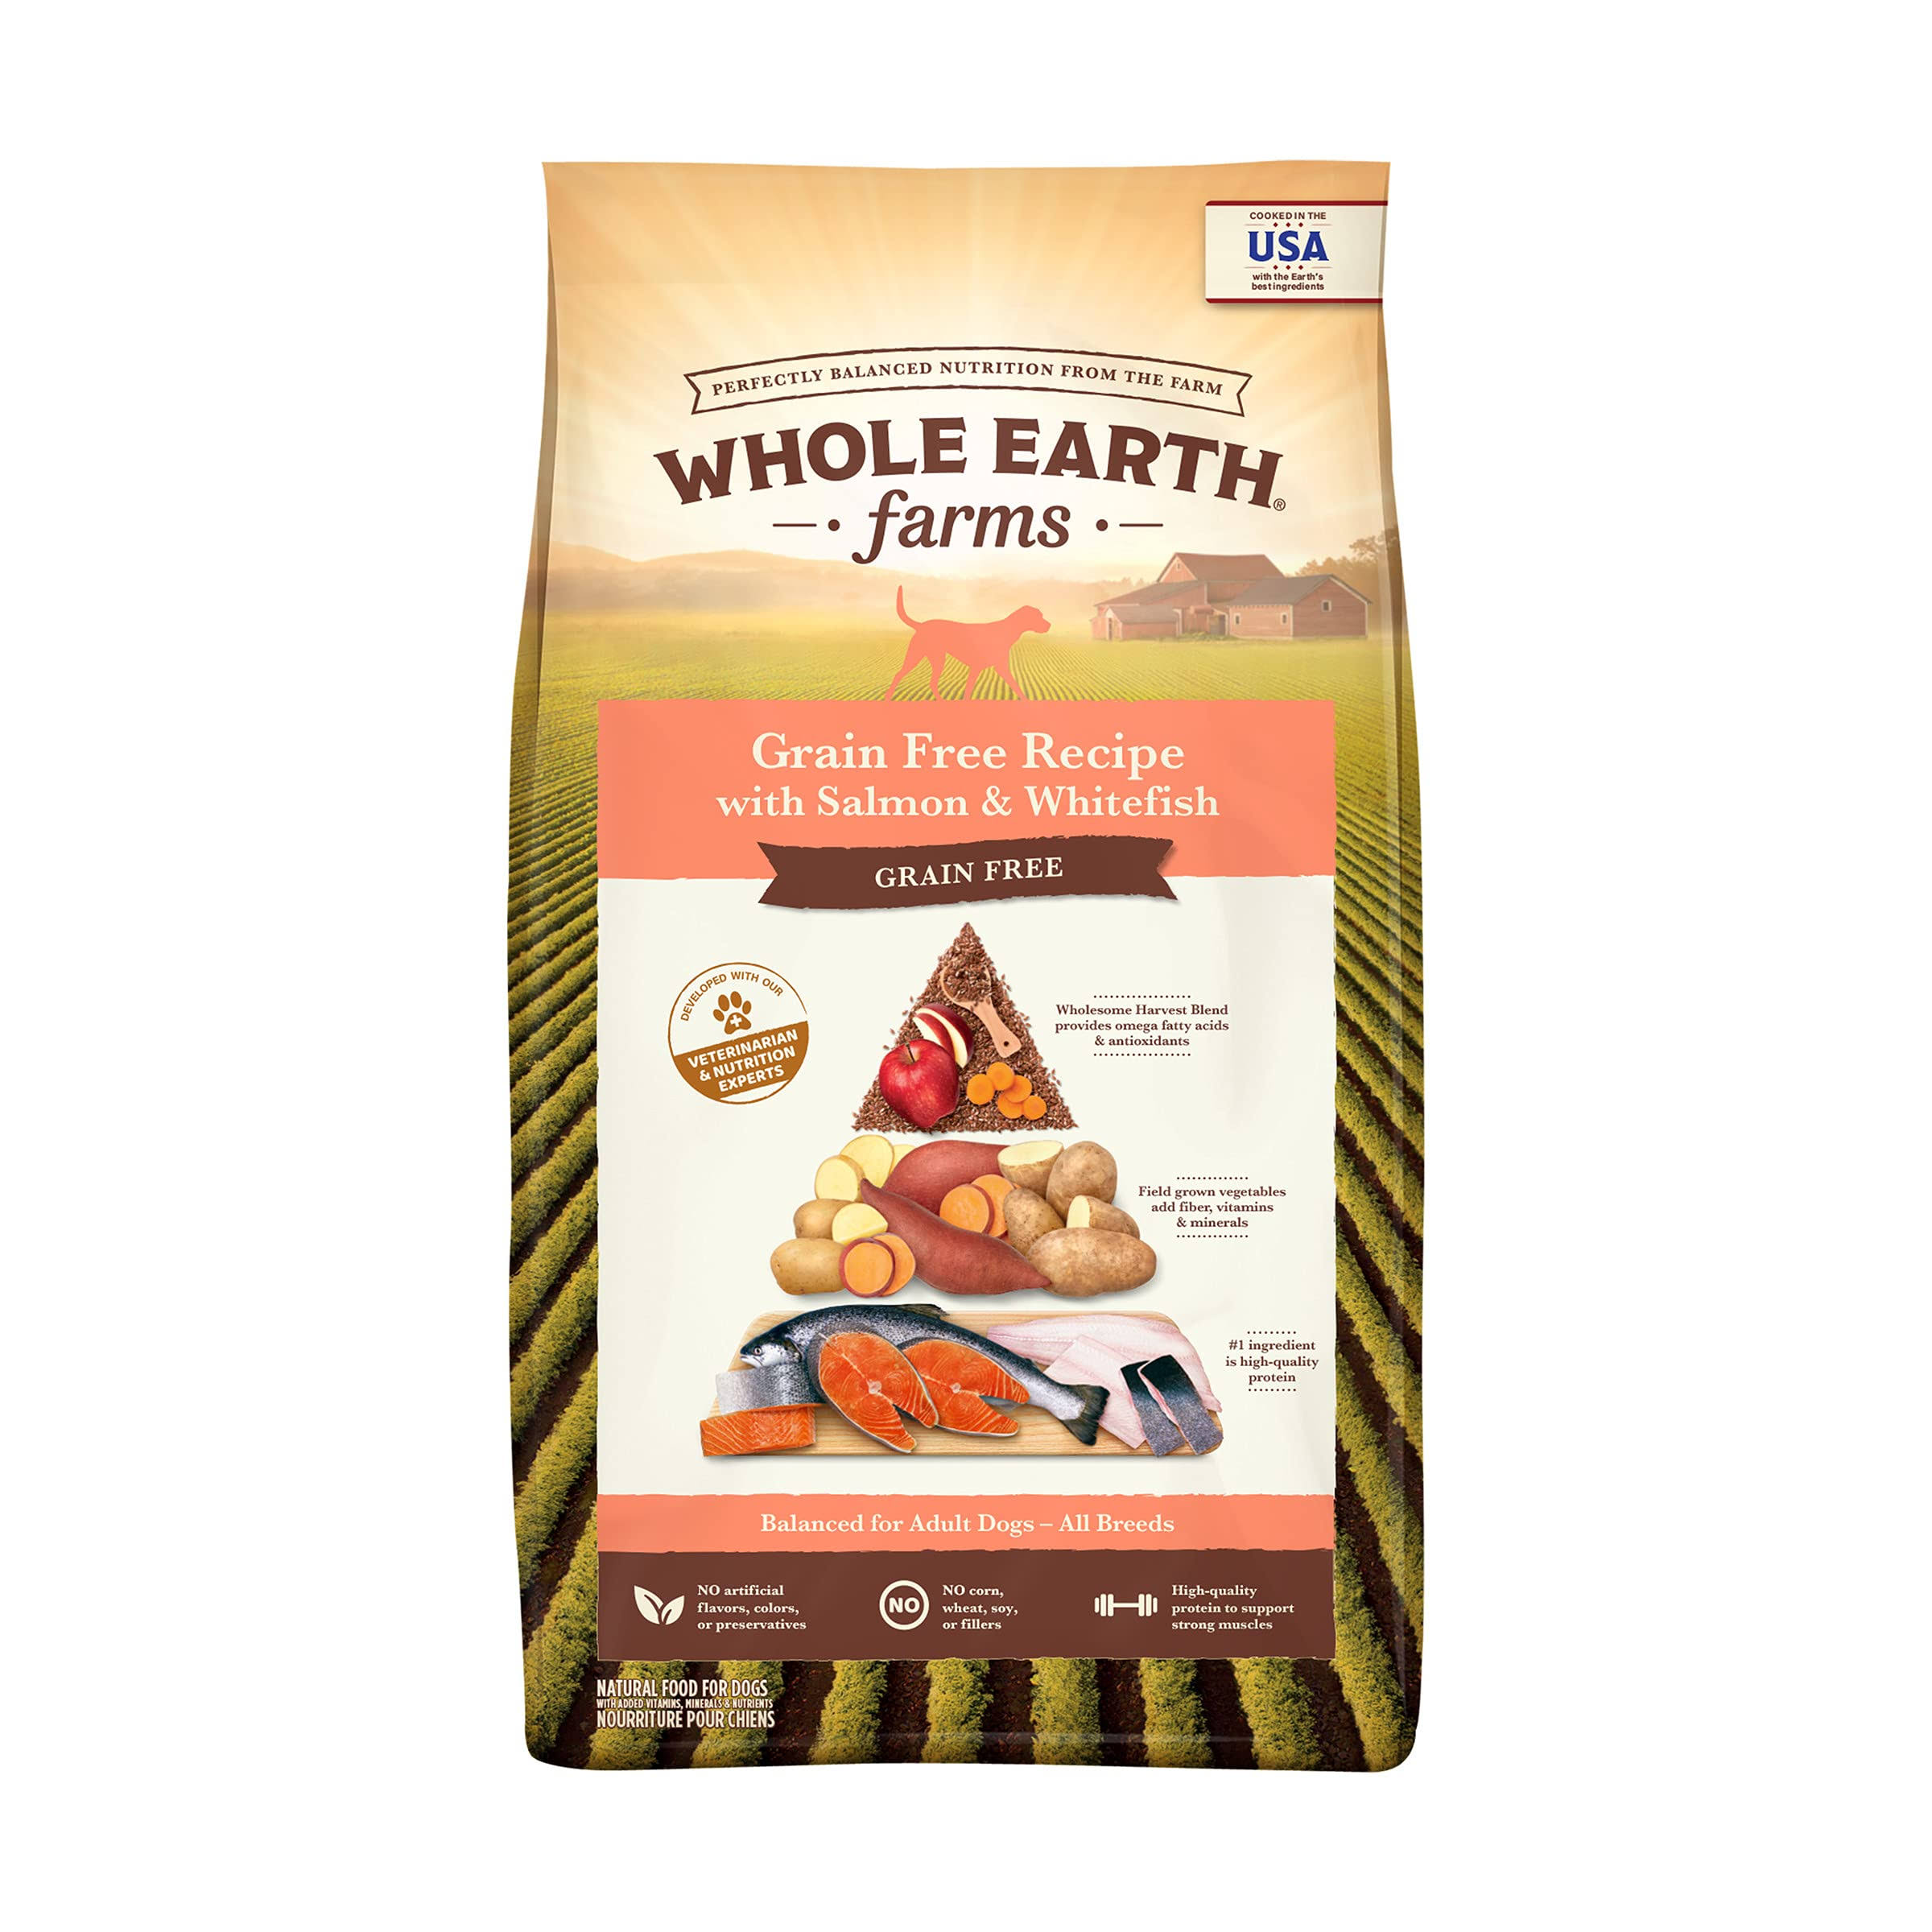 Whole Earth Farms Grain Free Recipe Dry Dog Food - Salmon and Whitefish, 25lb